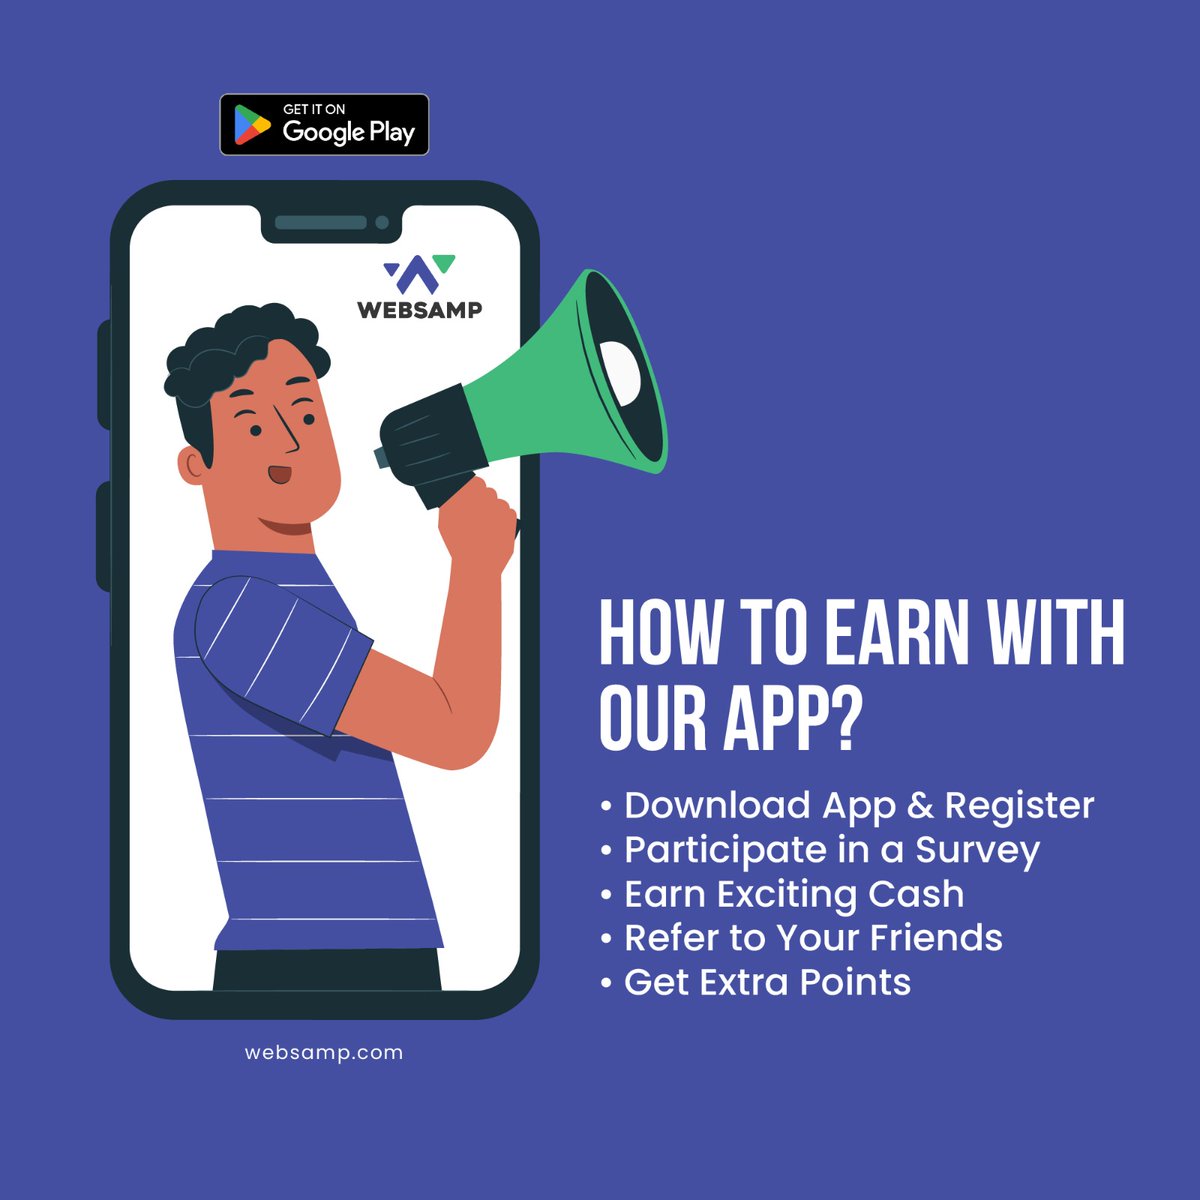 Earn quick cash with Websamp! Download the app at: play.google.com/store/apps/dat…. Take surveys and refer friends for extra points!

#earnmoney #surveyearnings #easyincome #websampapp #makemoneyonline #getpaidtosurvey #referandearn